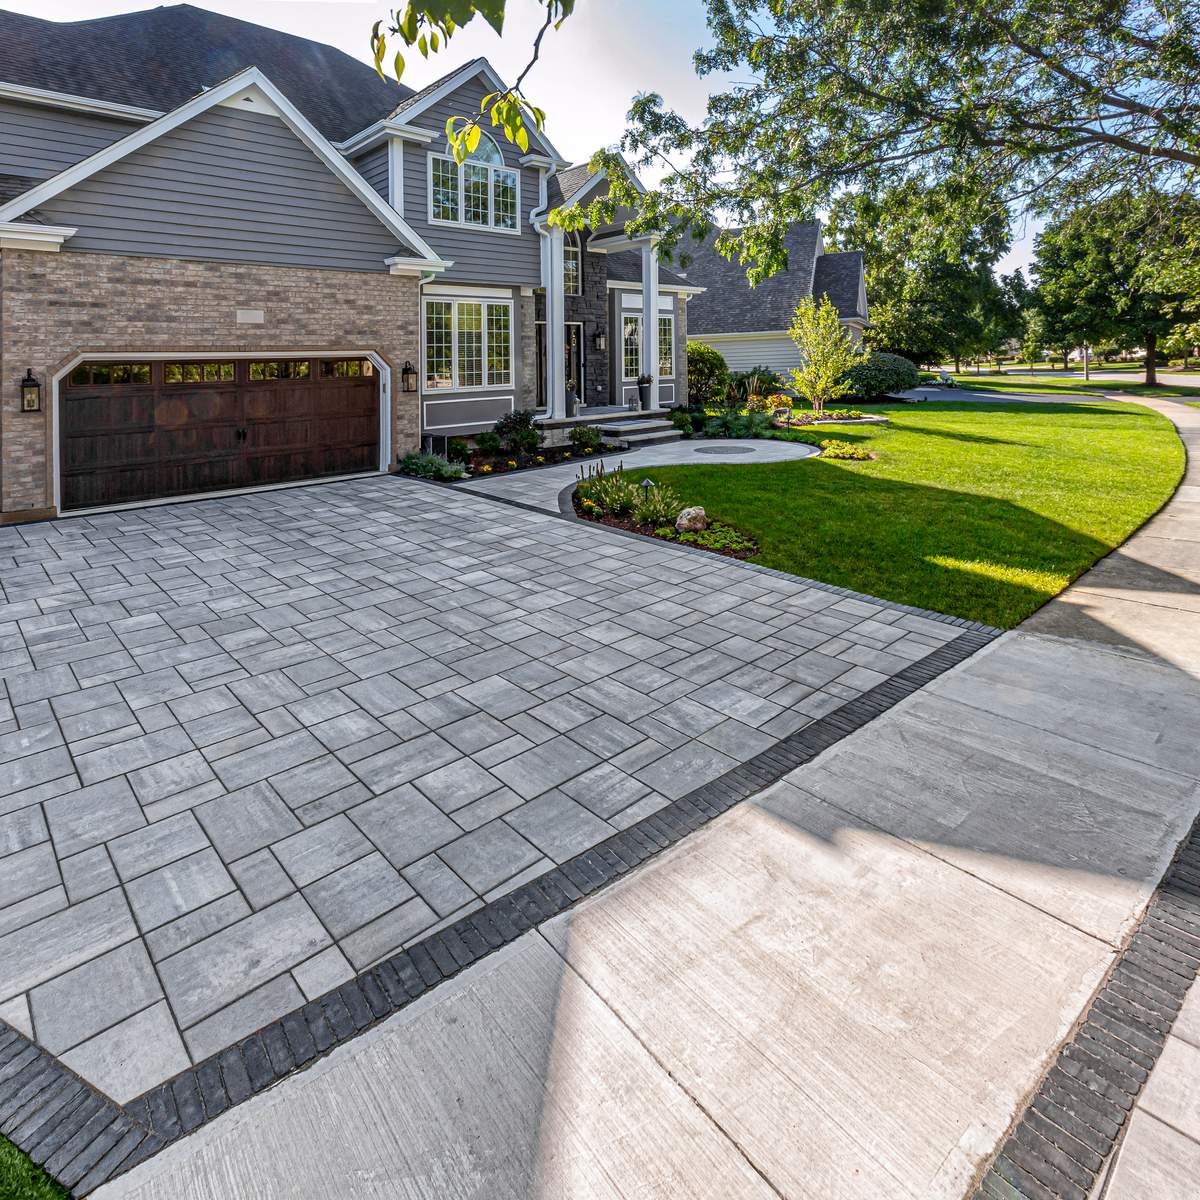 Interlocking paver driveway in front of house